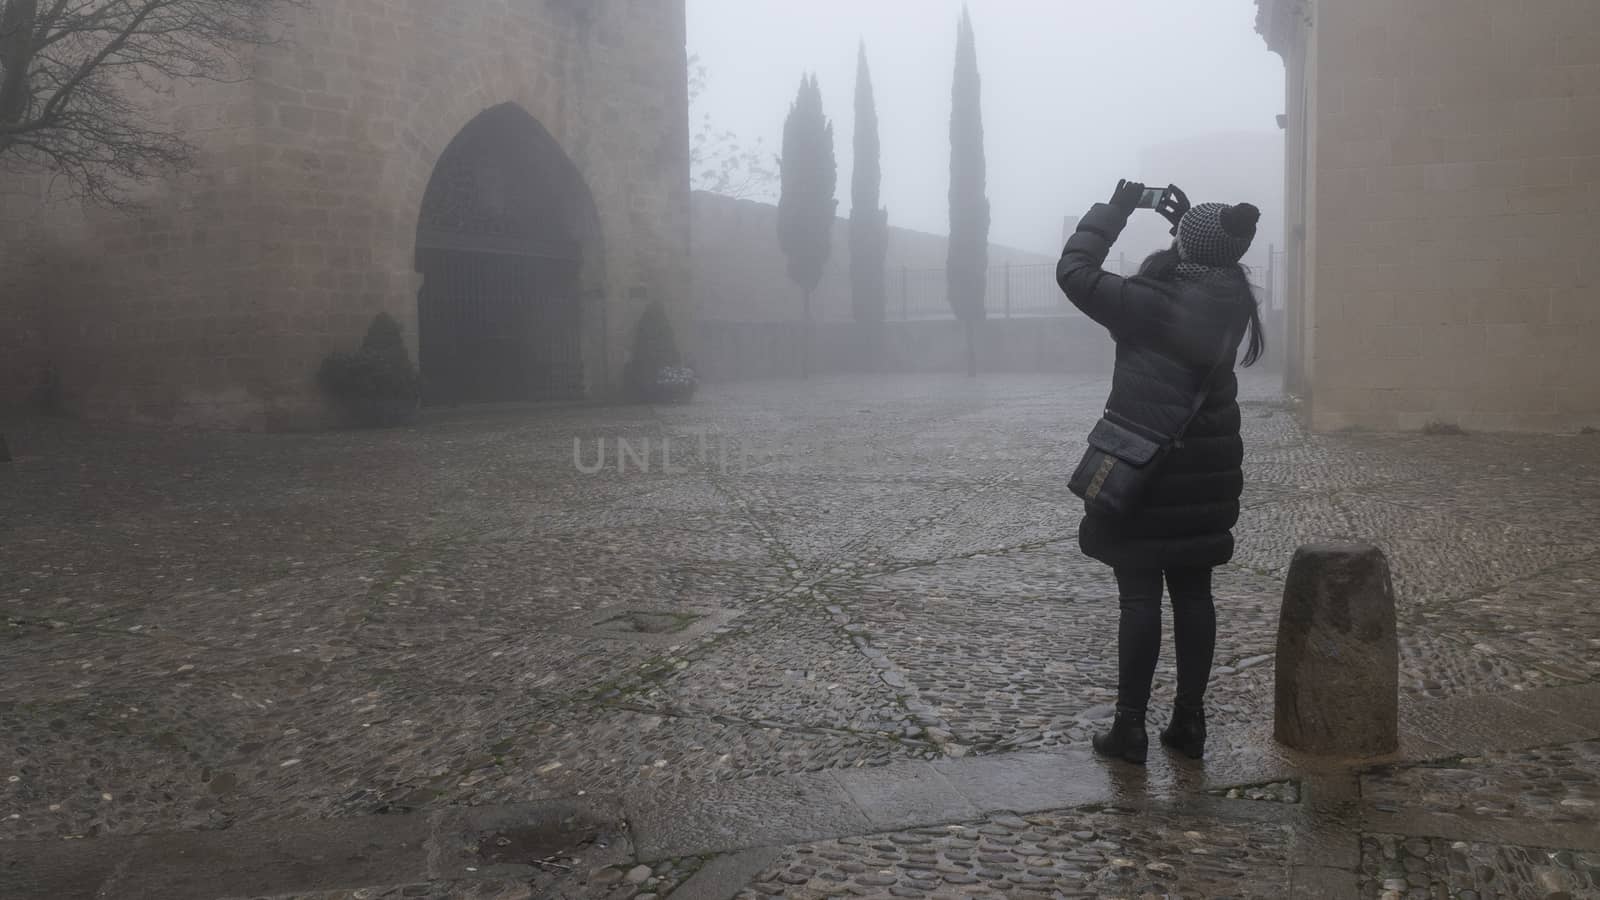 Woman shooting photograph in the fog by nachrc2001